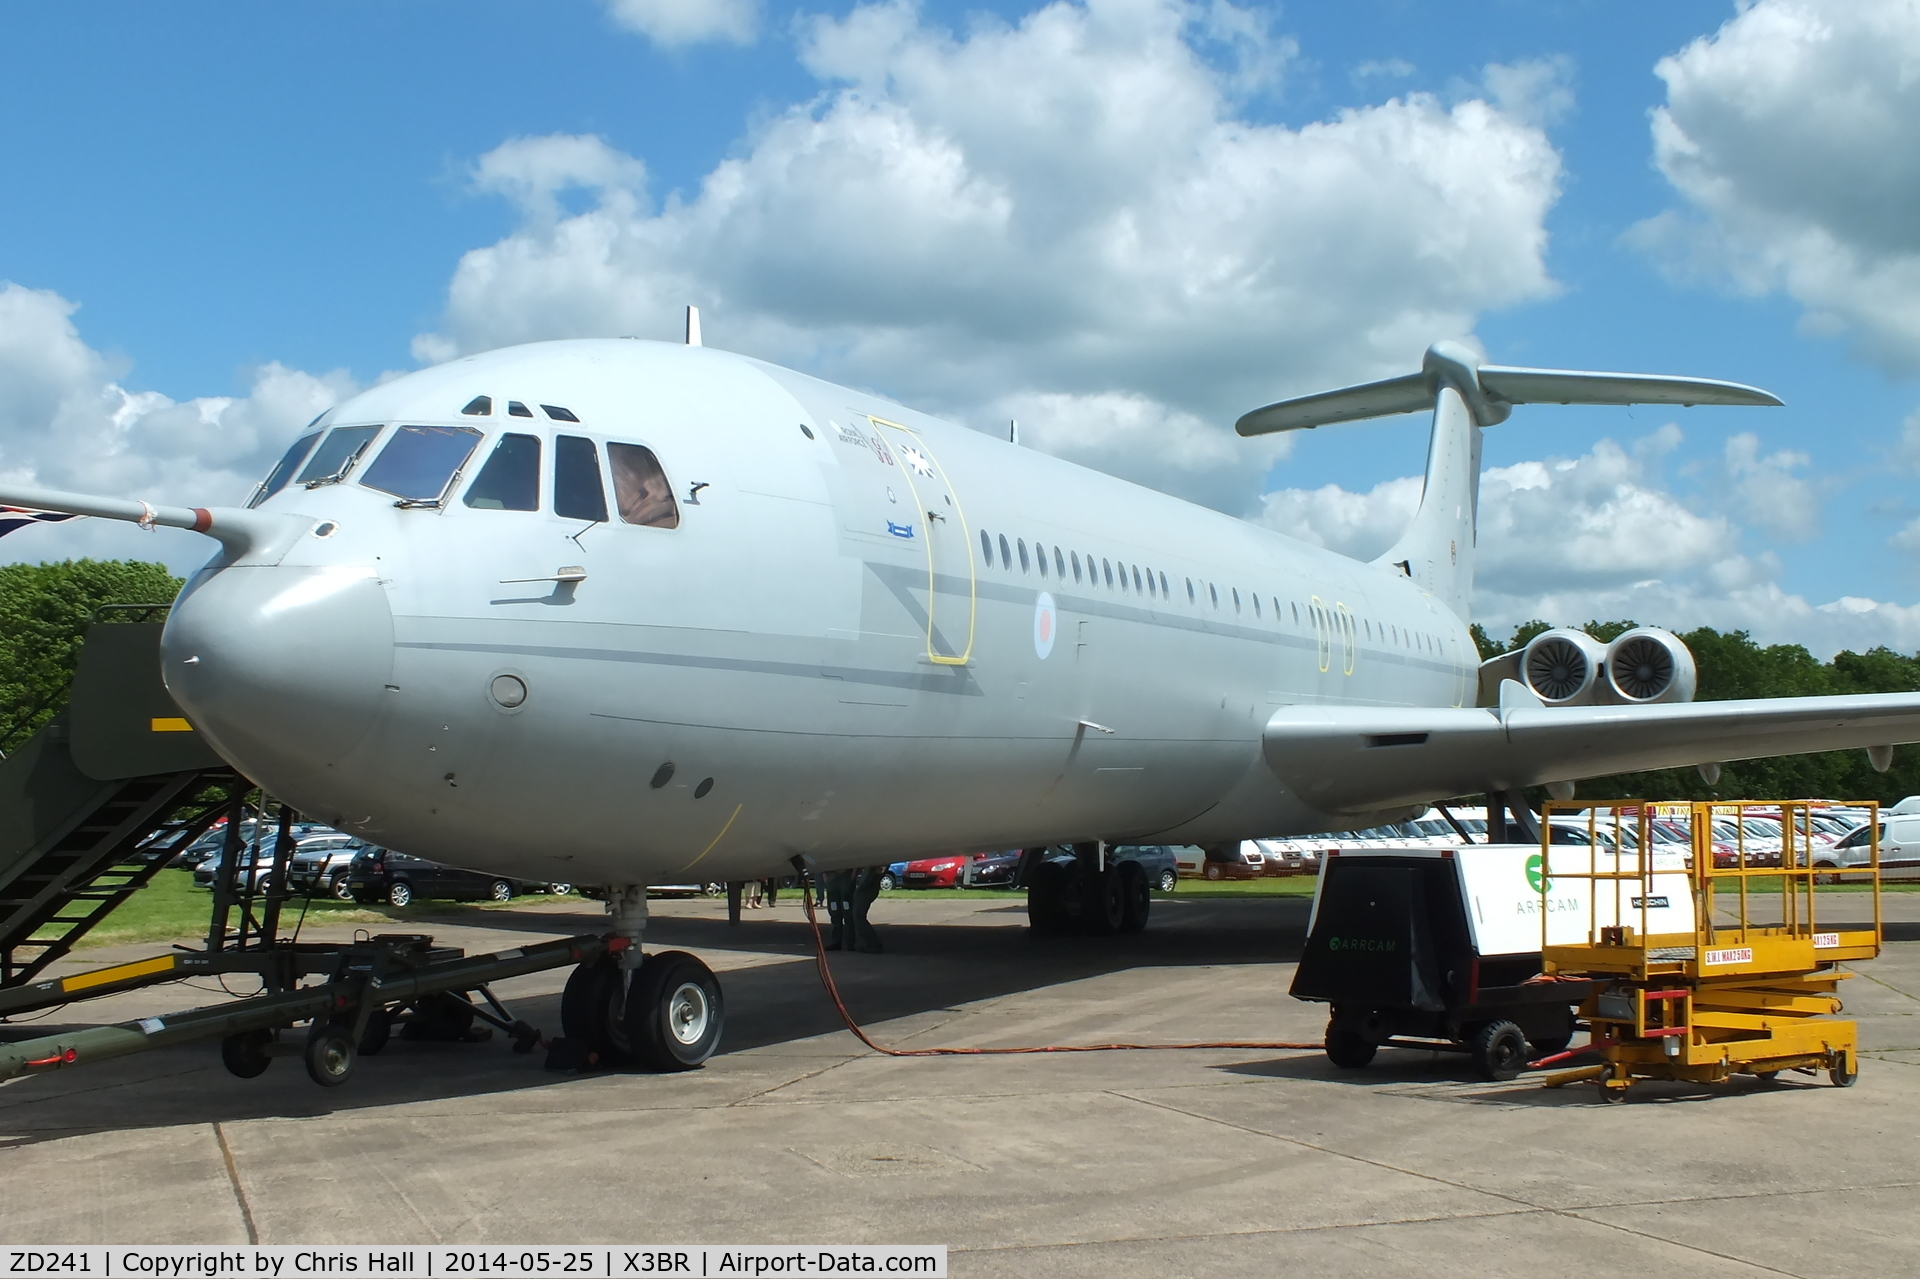 ZD241, 1968 Vickers Super VC10 K.4 C/N 863, at the Cold War Jets Open Day 2014